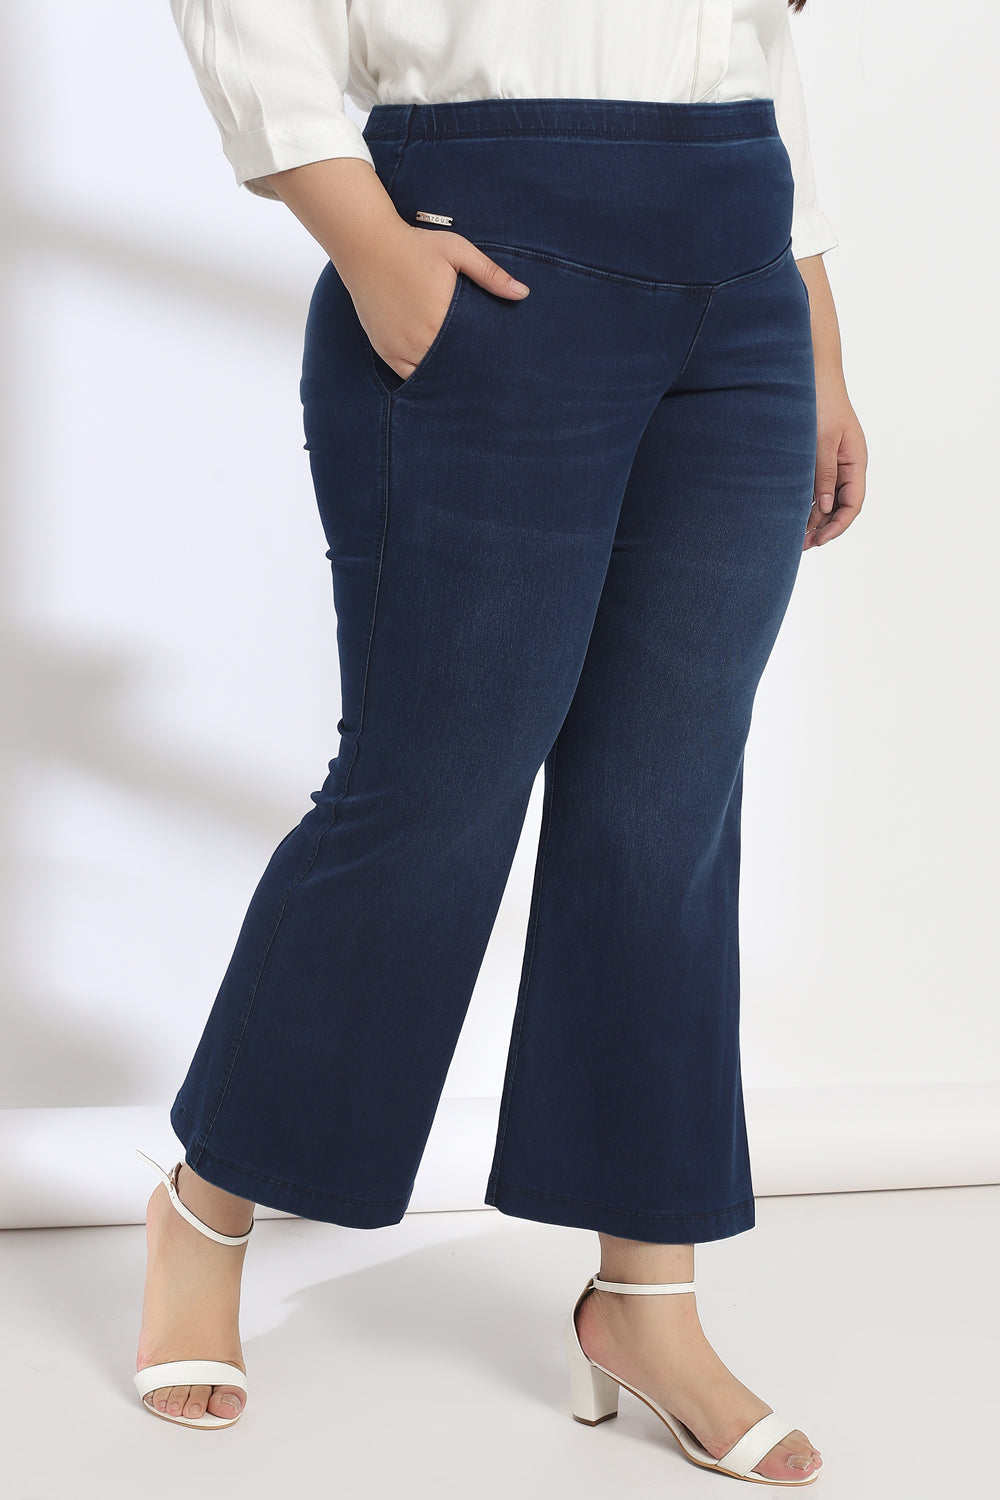 Navy Blue Light Fade Flare Jeans for Women